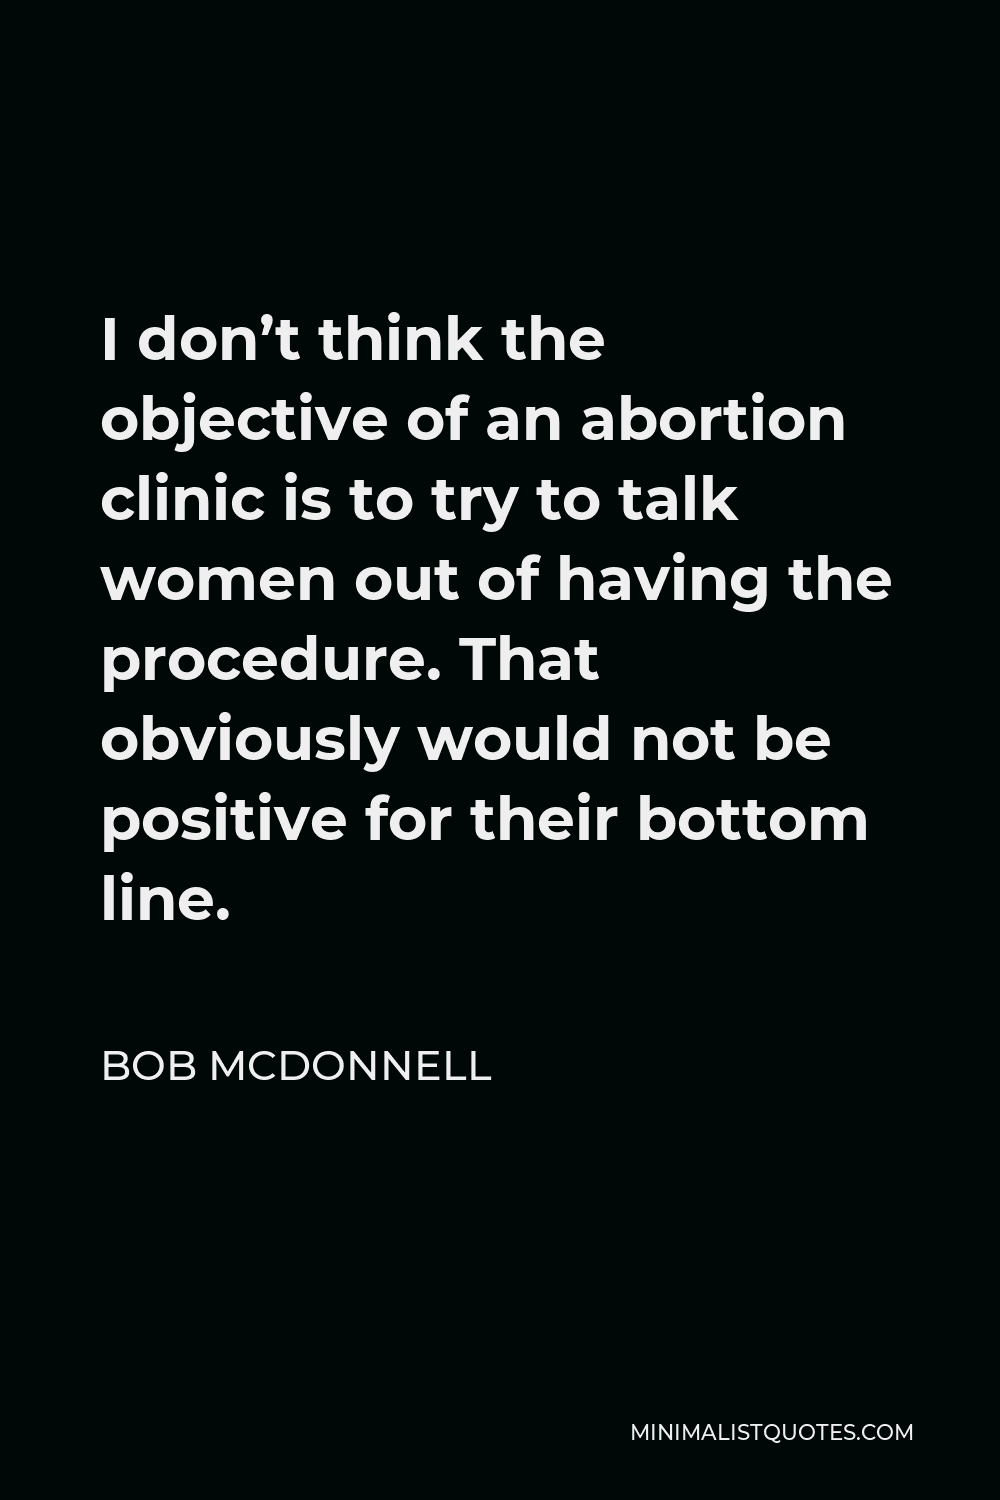 Bob McDonnell Quote - I don’t think the objective of an abortion clinic is to try to talk women out of having the procedure. That obviously would not be positive for their bottom line.